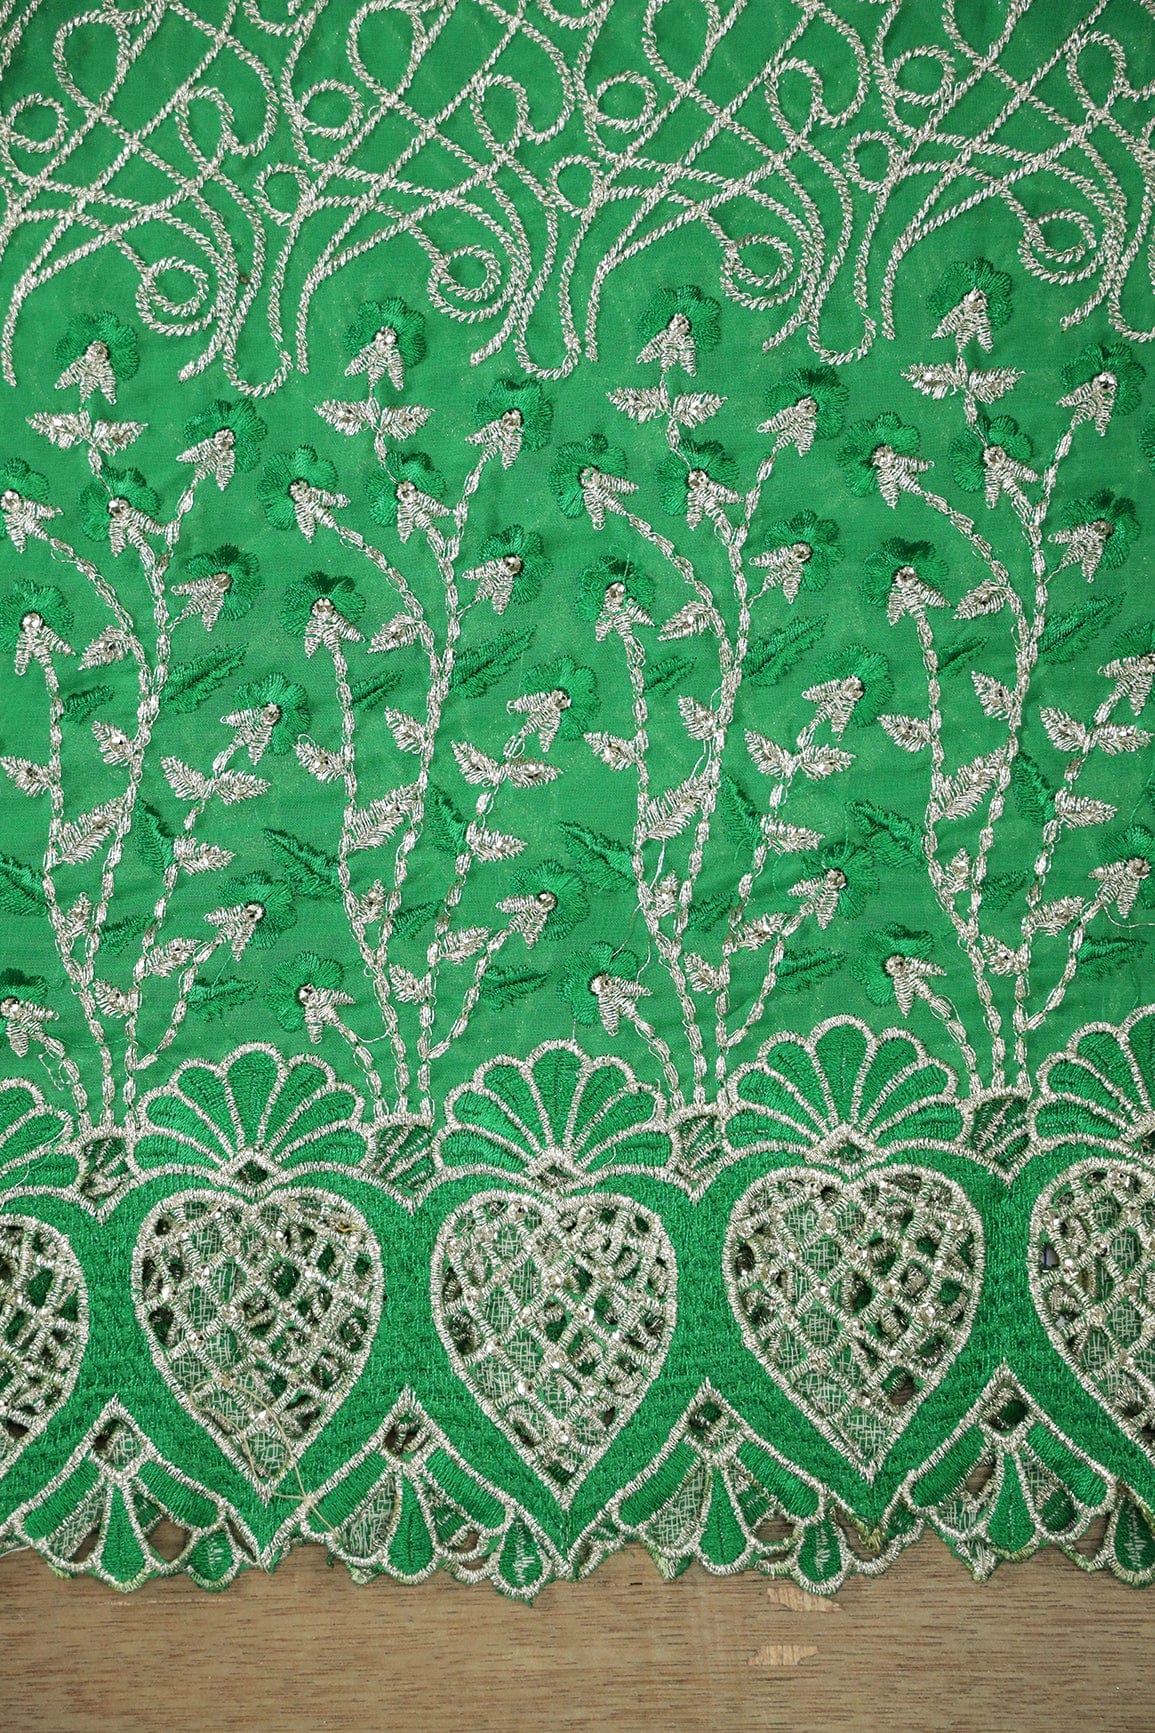 Big Width''56'' Green Thread With Zari Floral Embroidery Work On Green Georgette Fabric With Border - doeraa